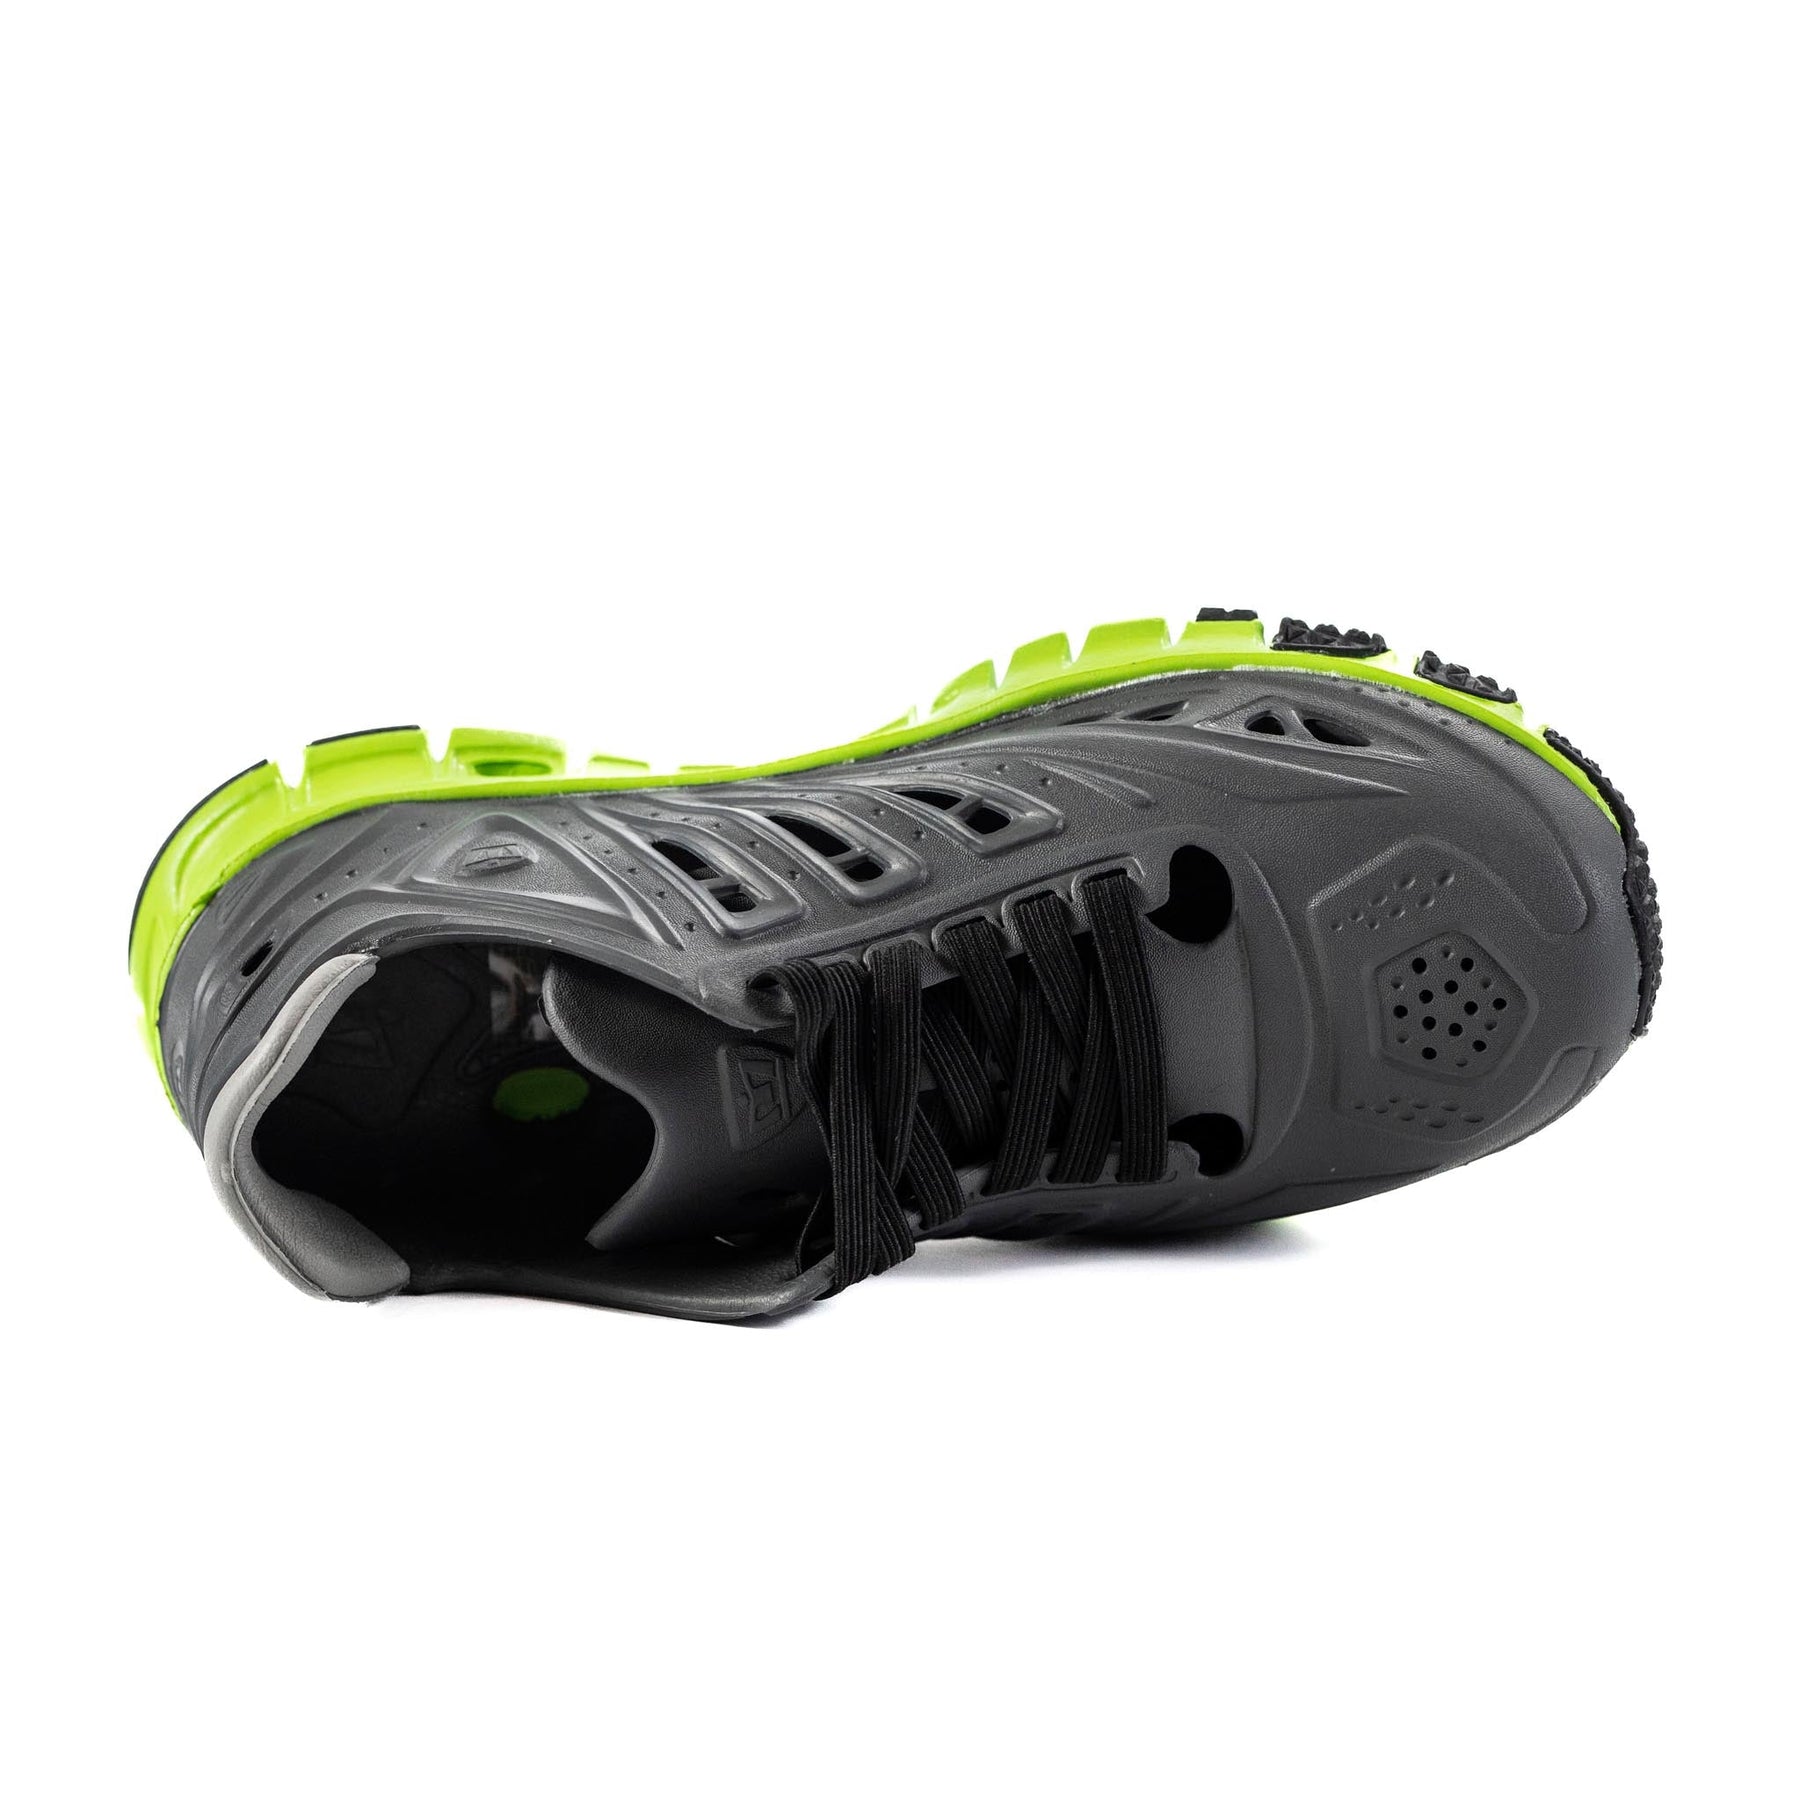 APX Closed Toe Lace Up Water Shoes for Big Kids by CROSSKIX - Sportsman Gear